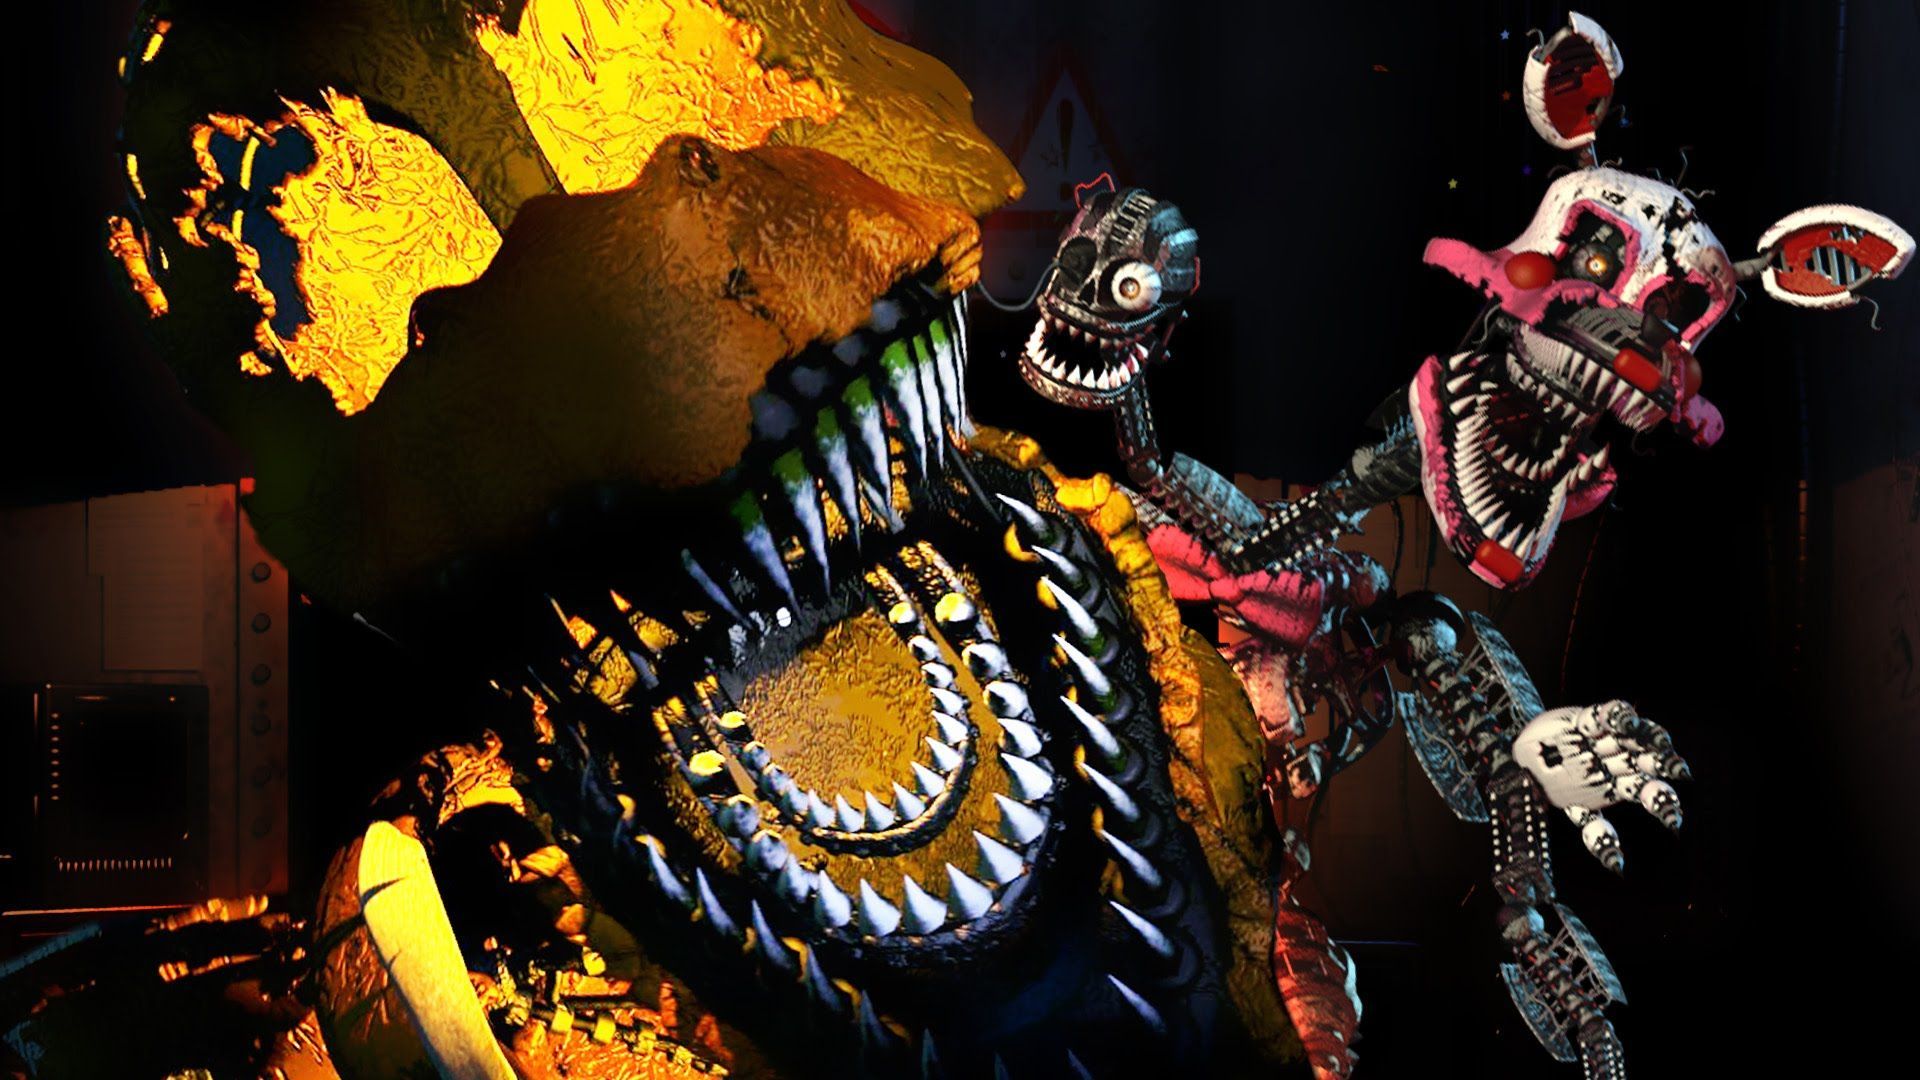 HAPPY HALLOWEEN. Five Nights at Freddy's Halloween Update 1. Halloween update, Fnaf wallpaper, Five nights at freddy's